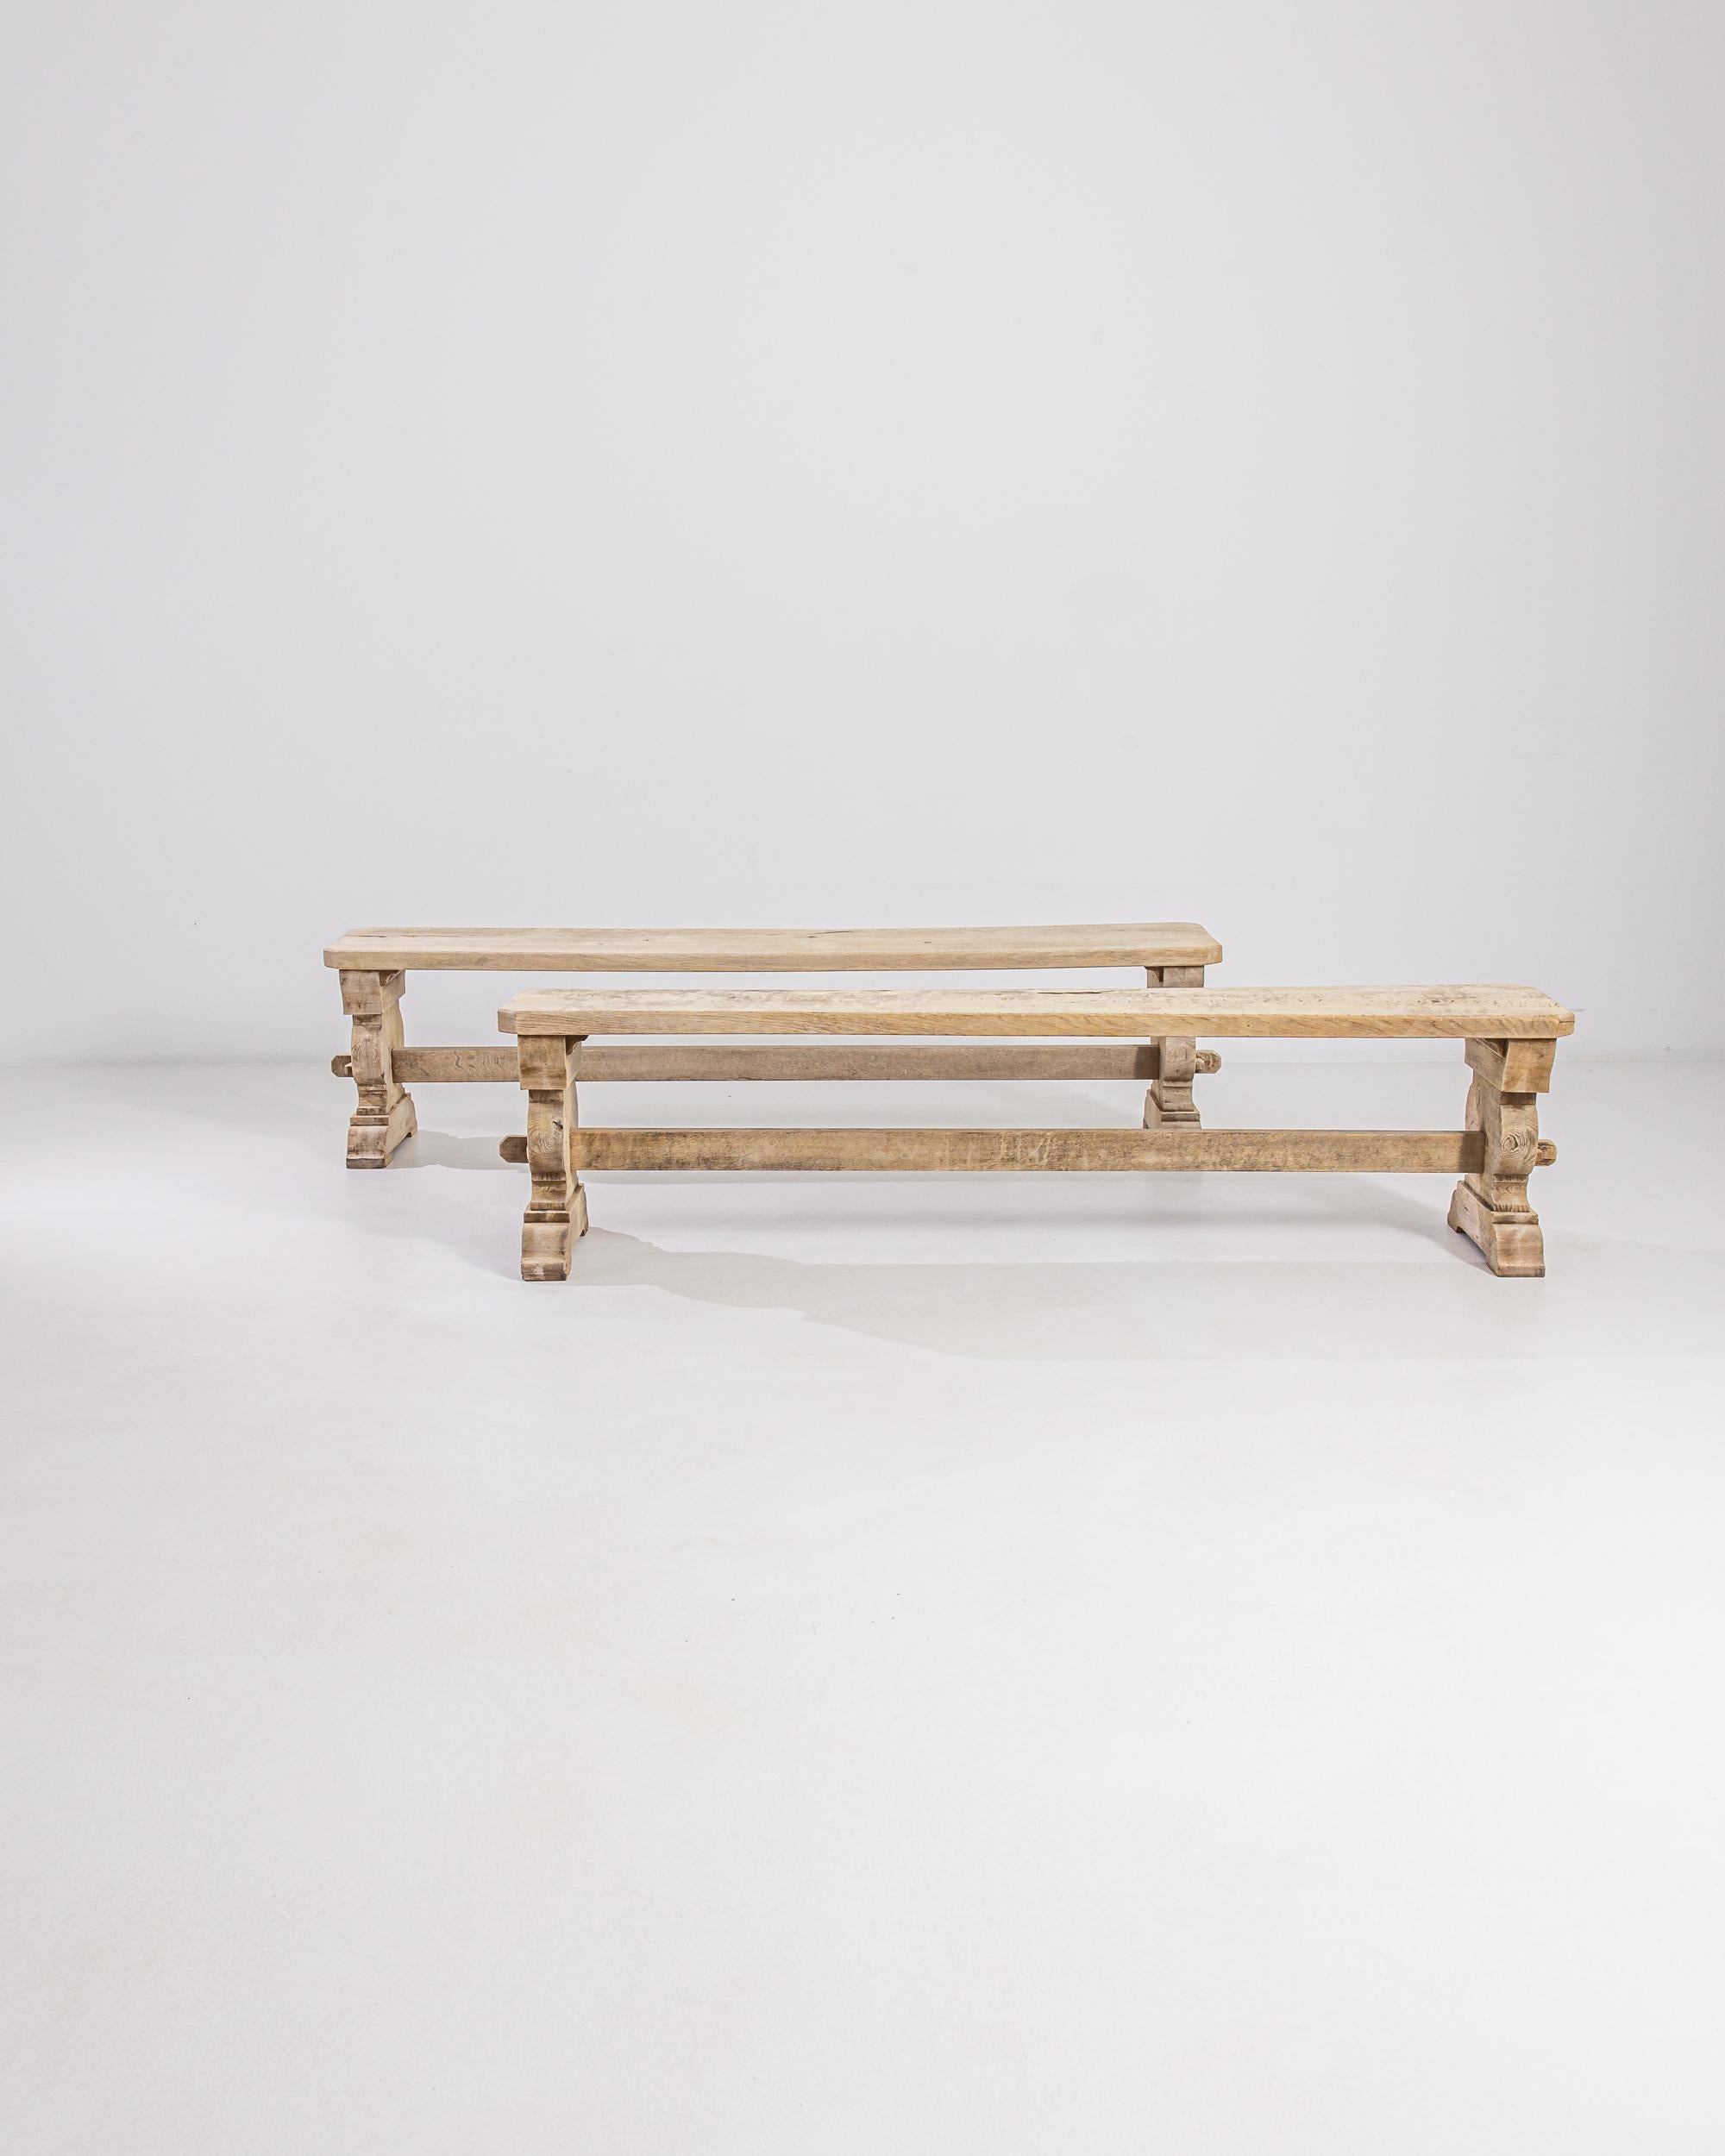 Built in 20th century Belgium, this pair of vintage oak benches have an age-old silhouette which dates back to the long tables of medieval feasts. A simple seat rests atop carved trestle legs, joined with a stretcher, providing space for multiple